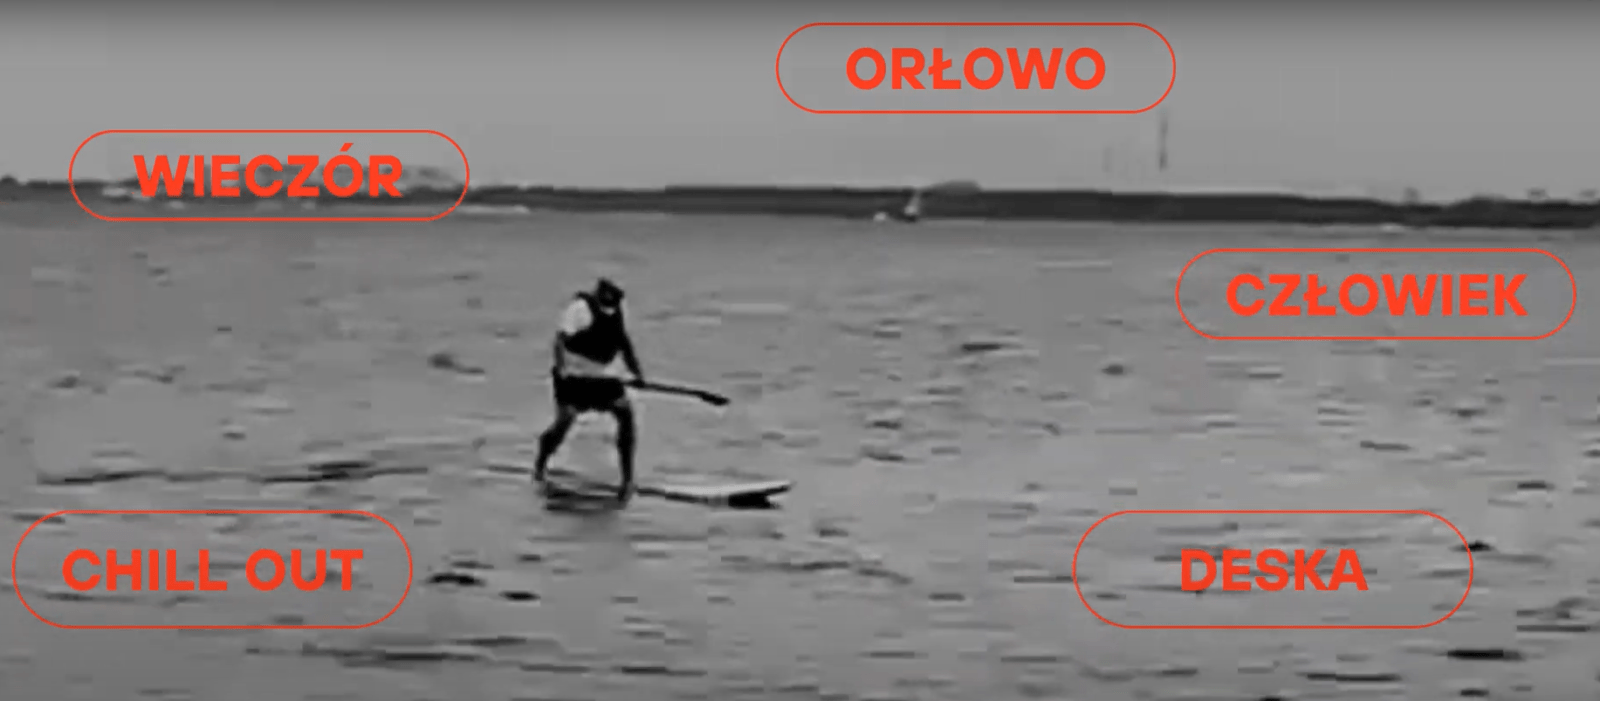 You are currently viewing Nauka podstaw SUP Surfingu w Orłowie!